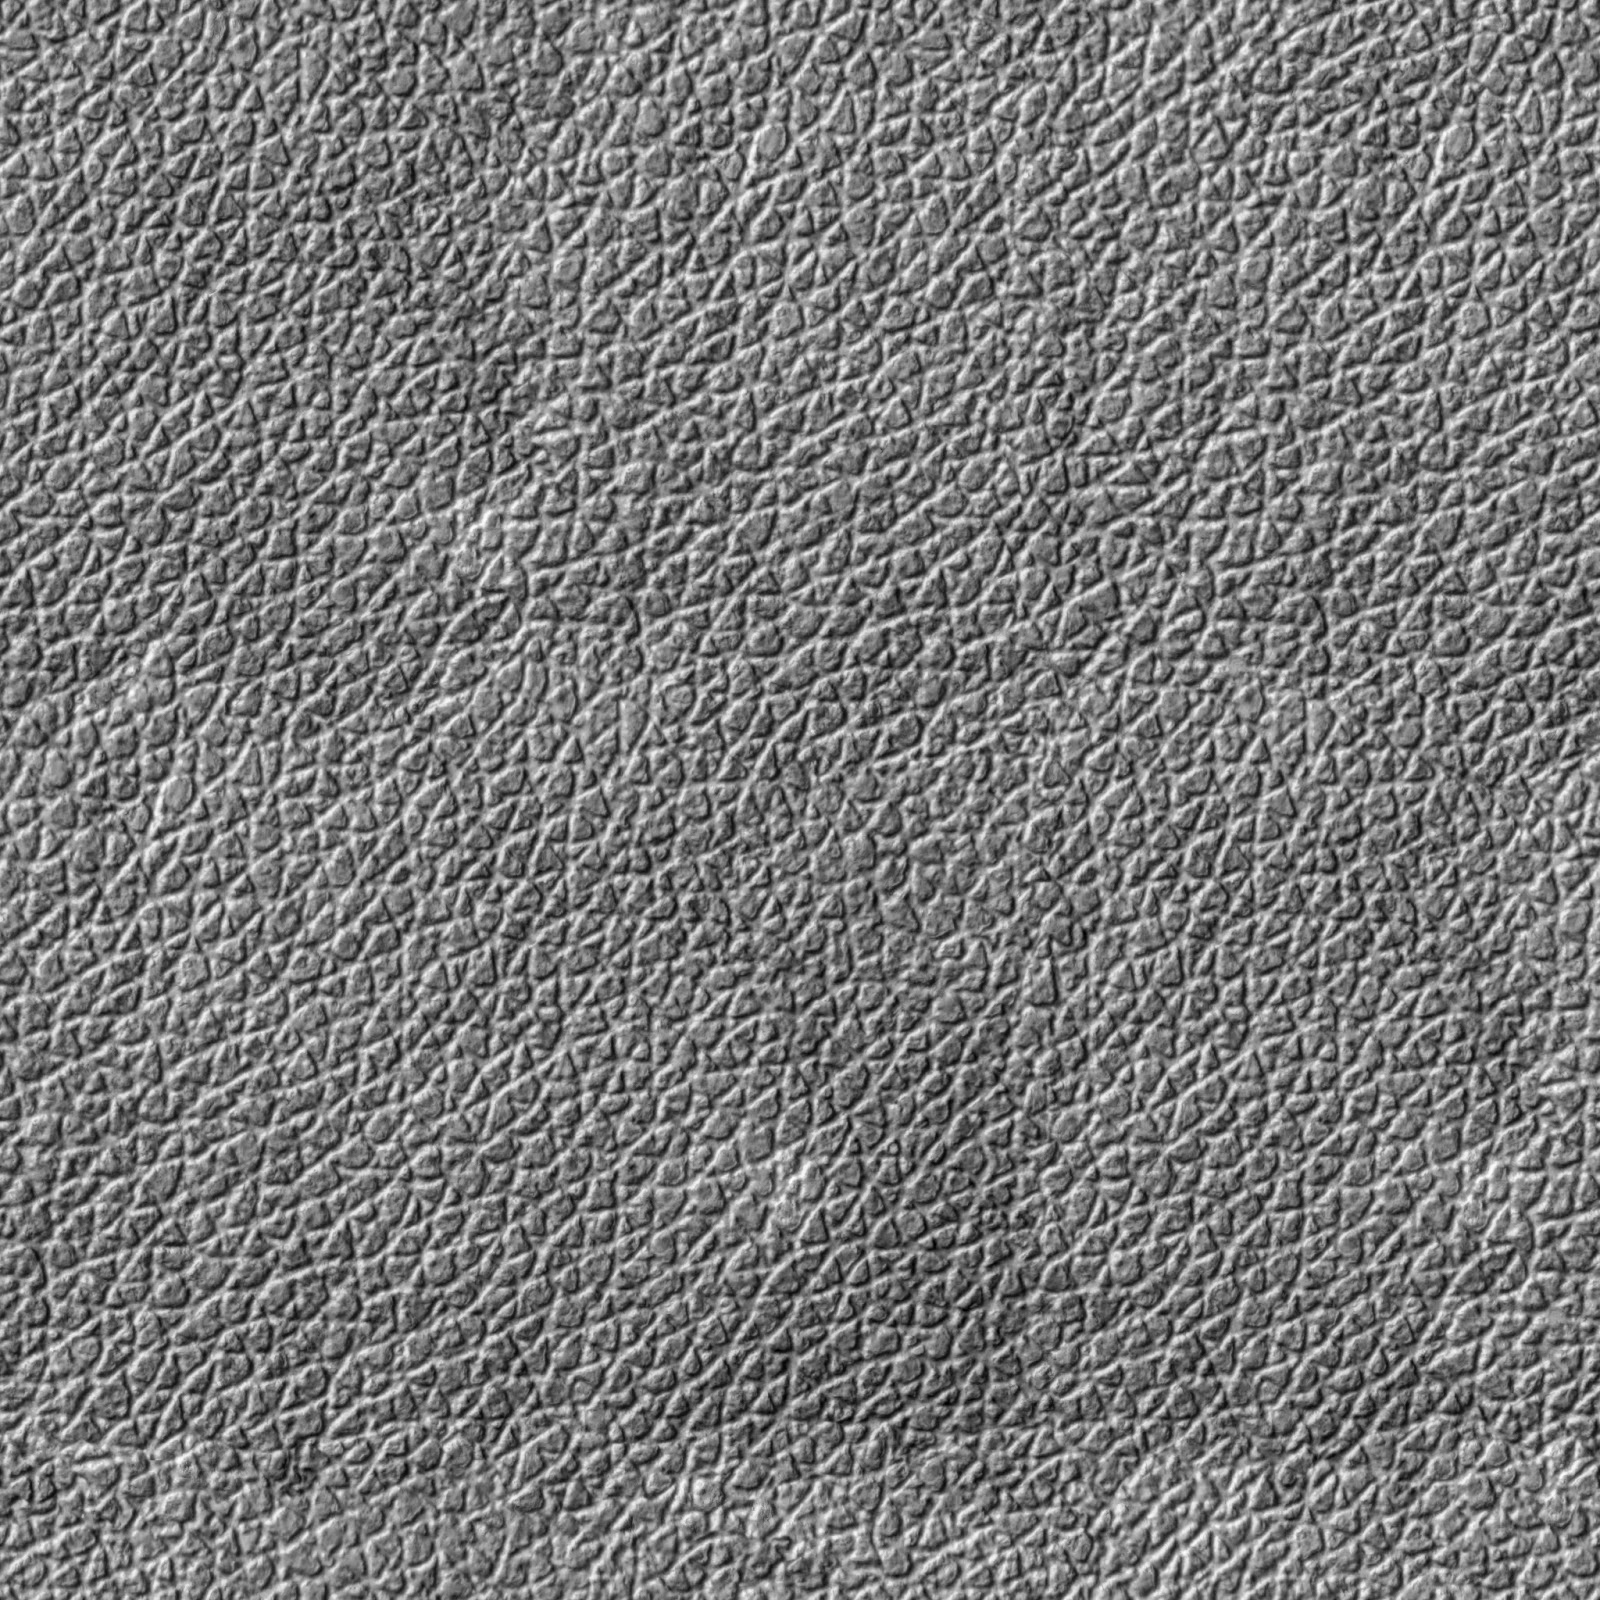 Seamless_Black_Leather_Texture_SPECULAR